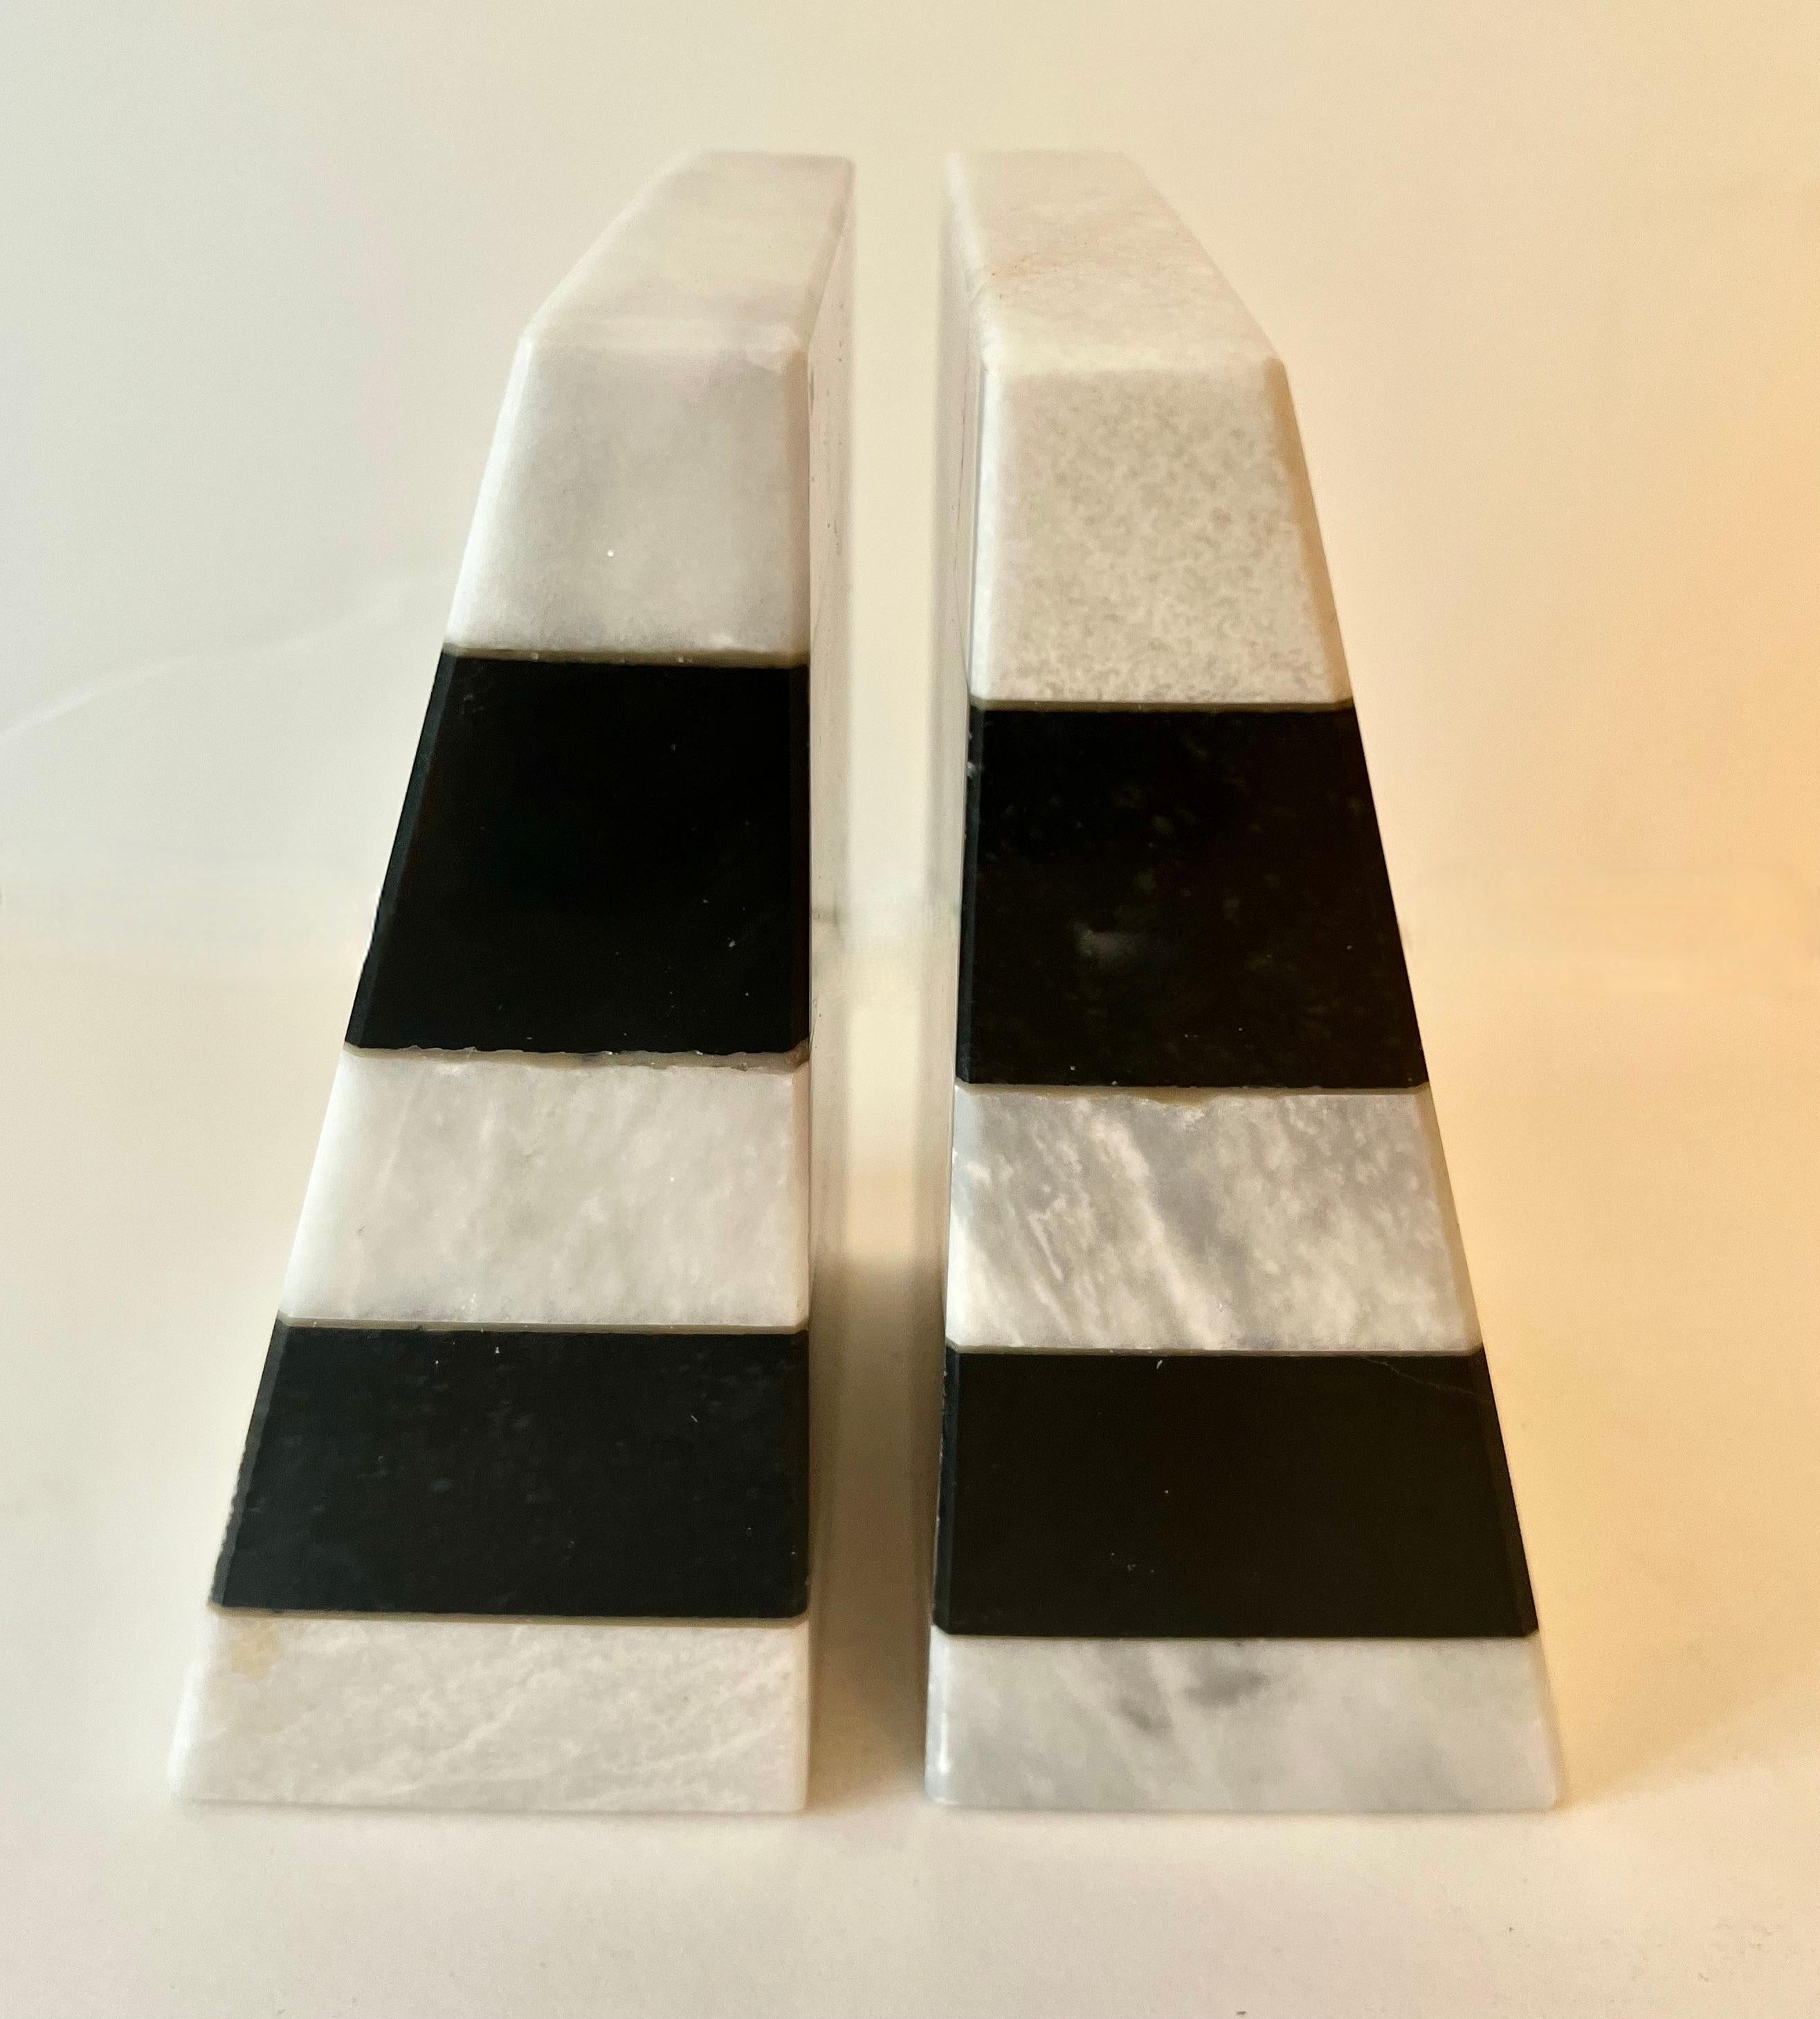 A wonderful pair of Carrera Marble Bookends - the 